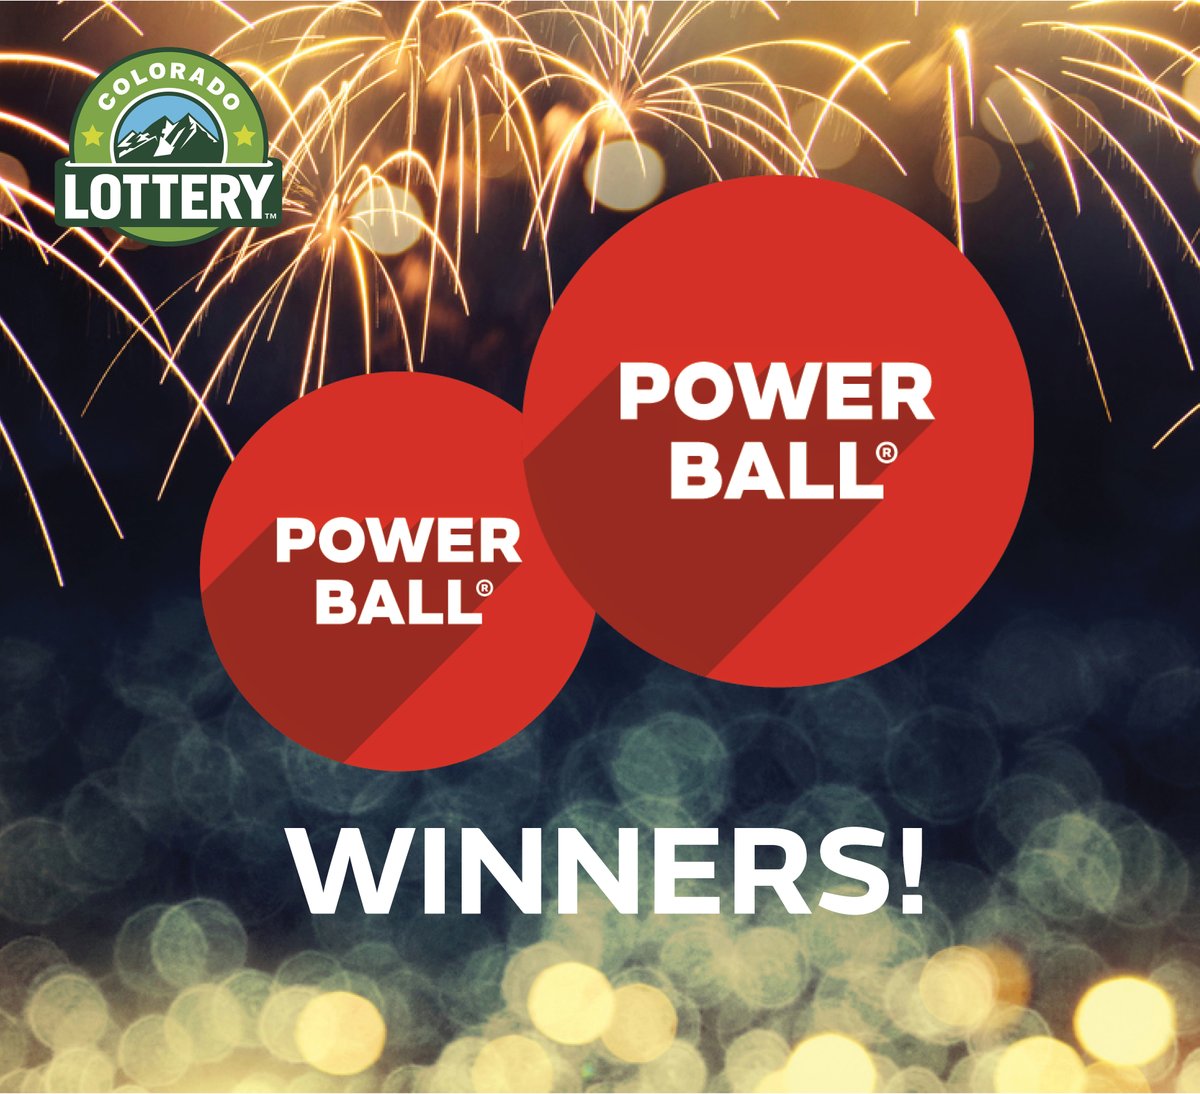 Powerball is so hot right now! Check out the recent big winners in CO:
SAT: A $150K winner sold at Loaf N' Jug on N Castleton in Castle Rock
MON: A $50K winner sold at 7-Eleven on Vasquez in Platteville
Don't forget -  the Powerball jackpot for Wed. night is up to $365 MILLION! https://t.co/UGP504rEOd